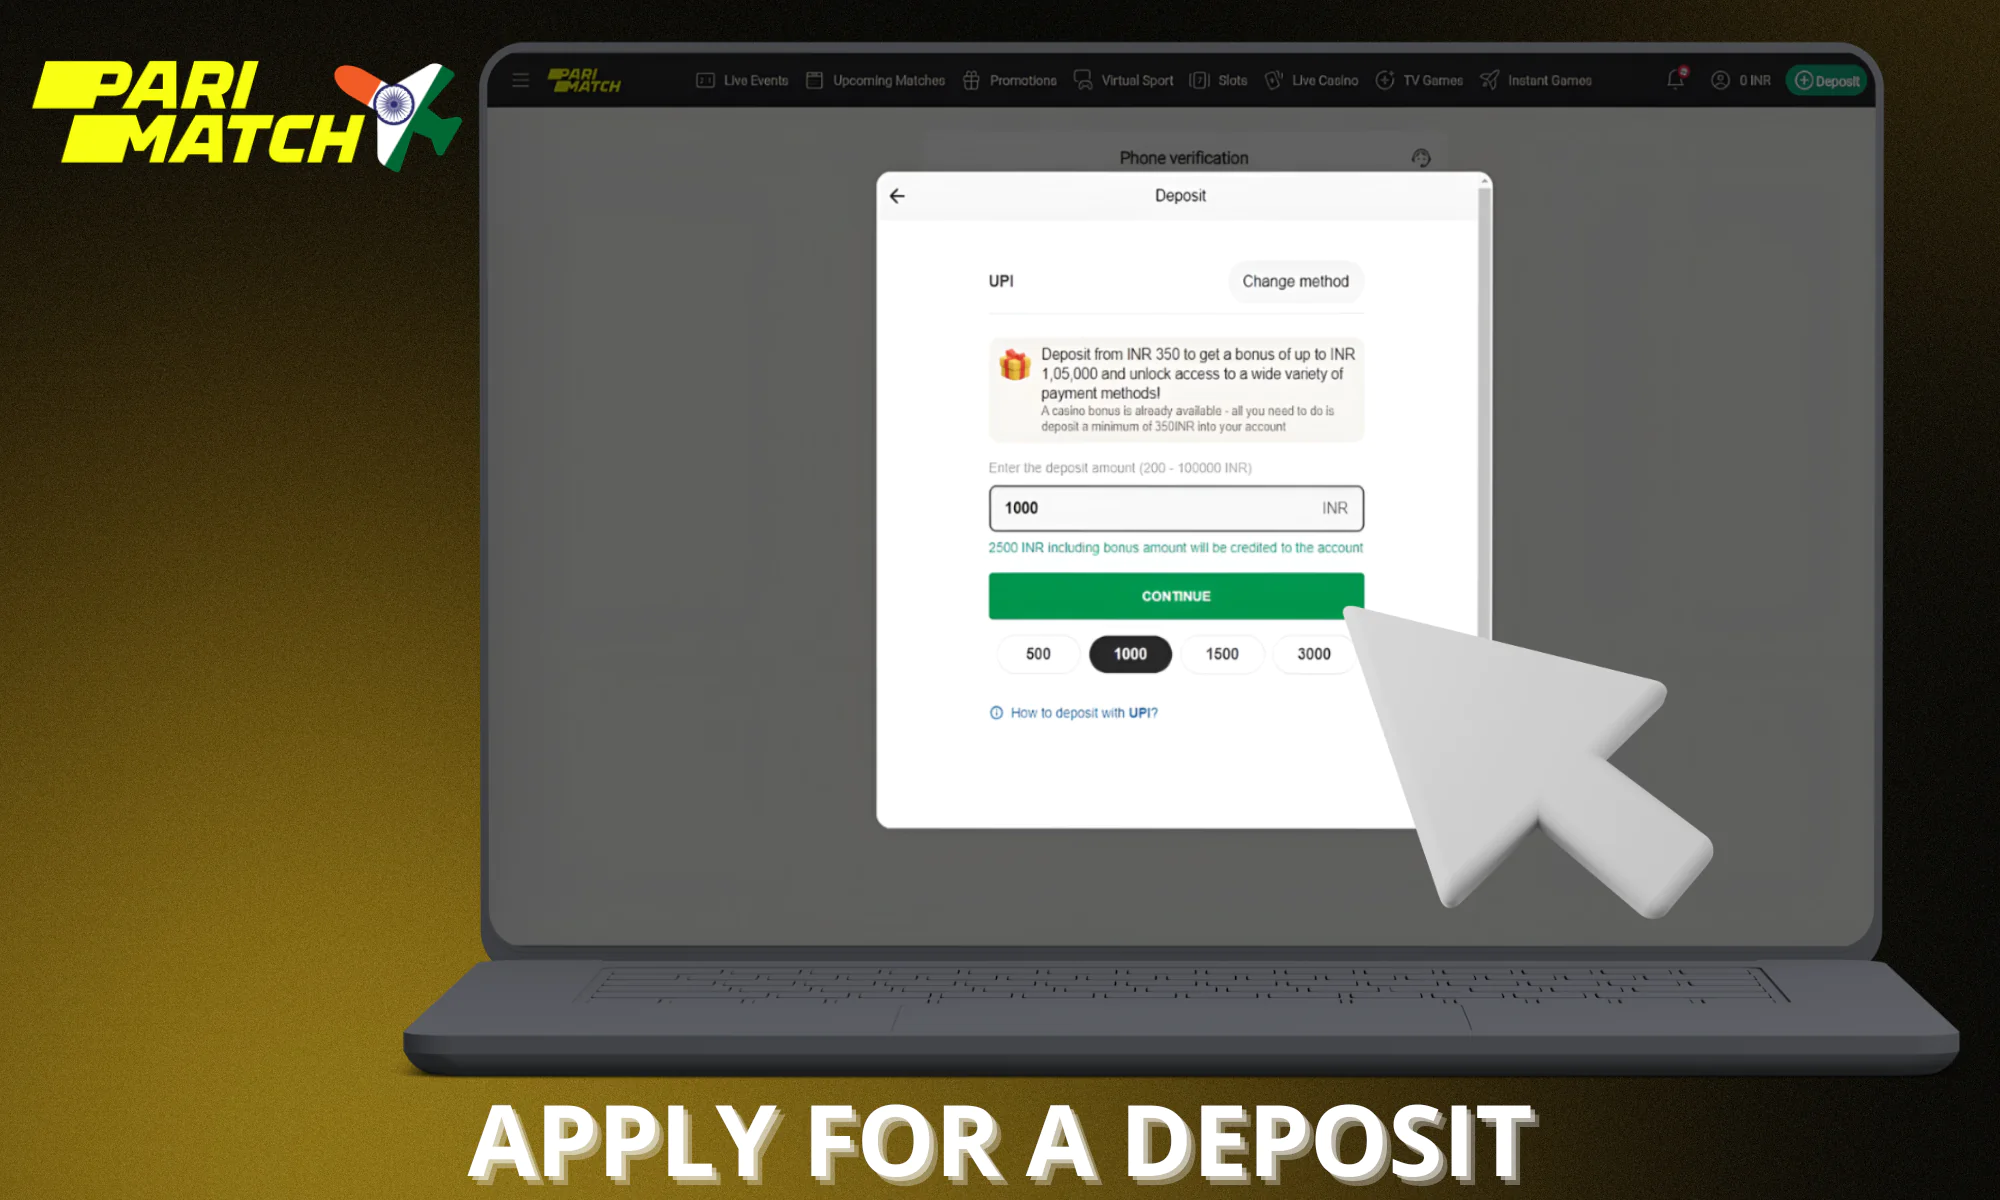 Confirm the deposit to receive funds to your account